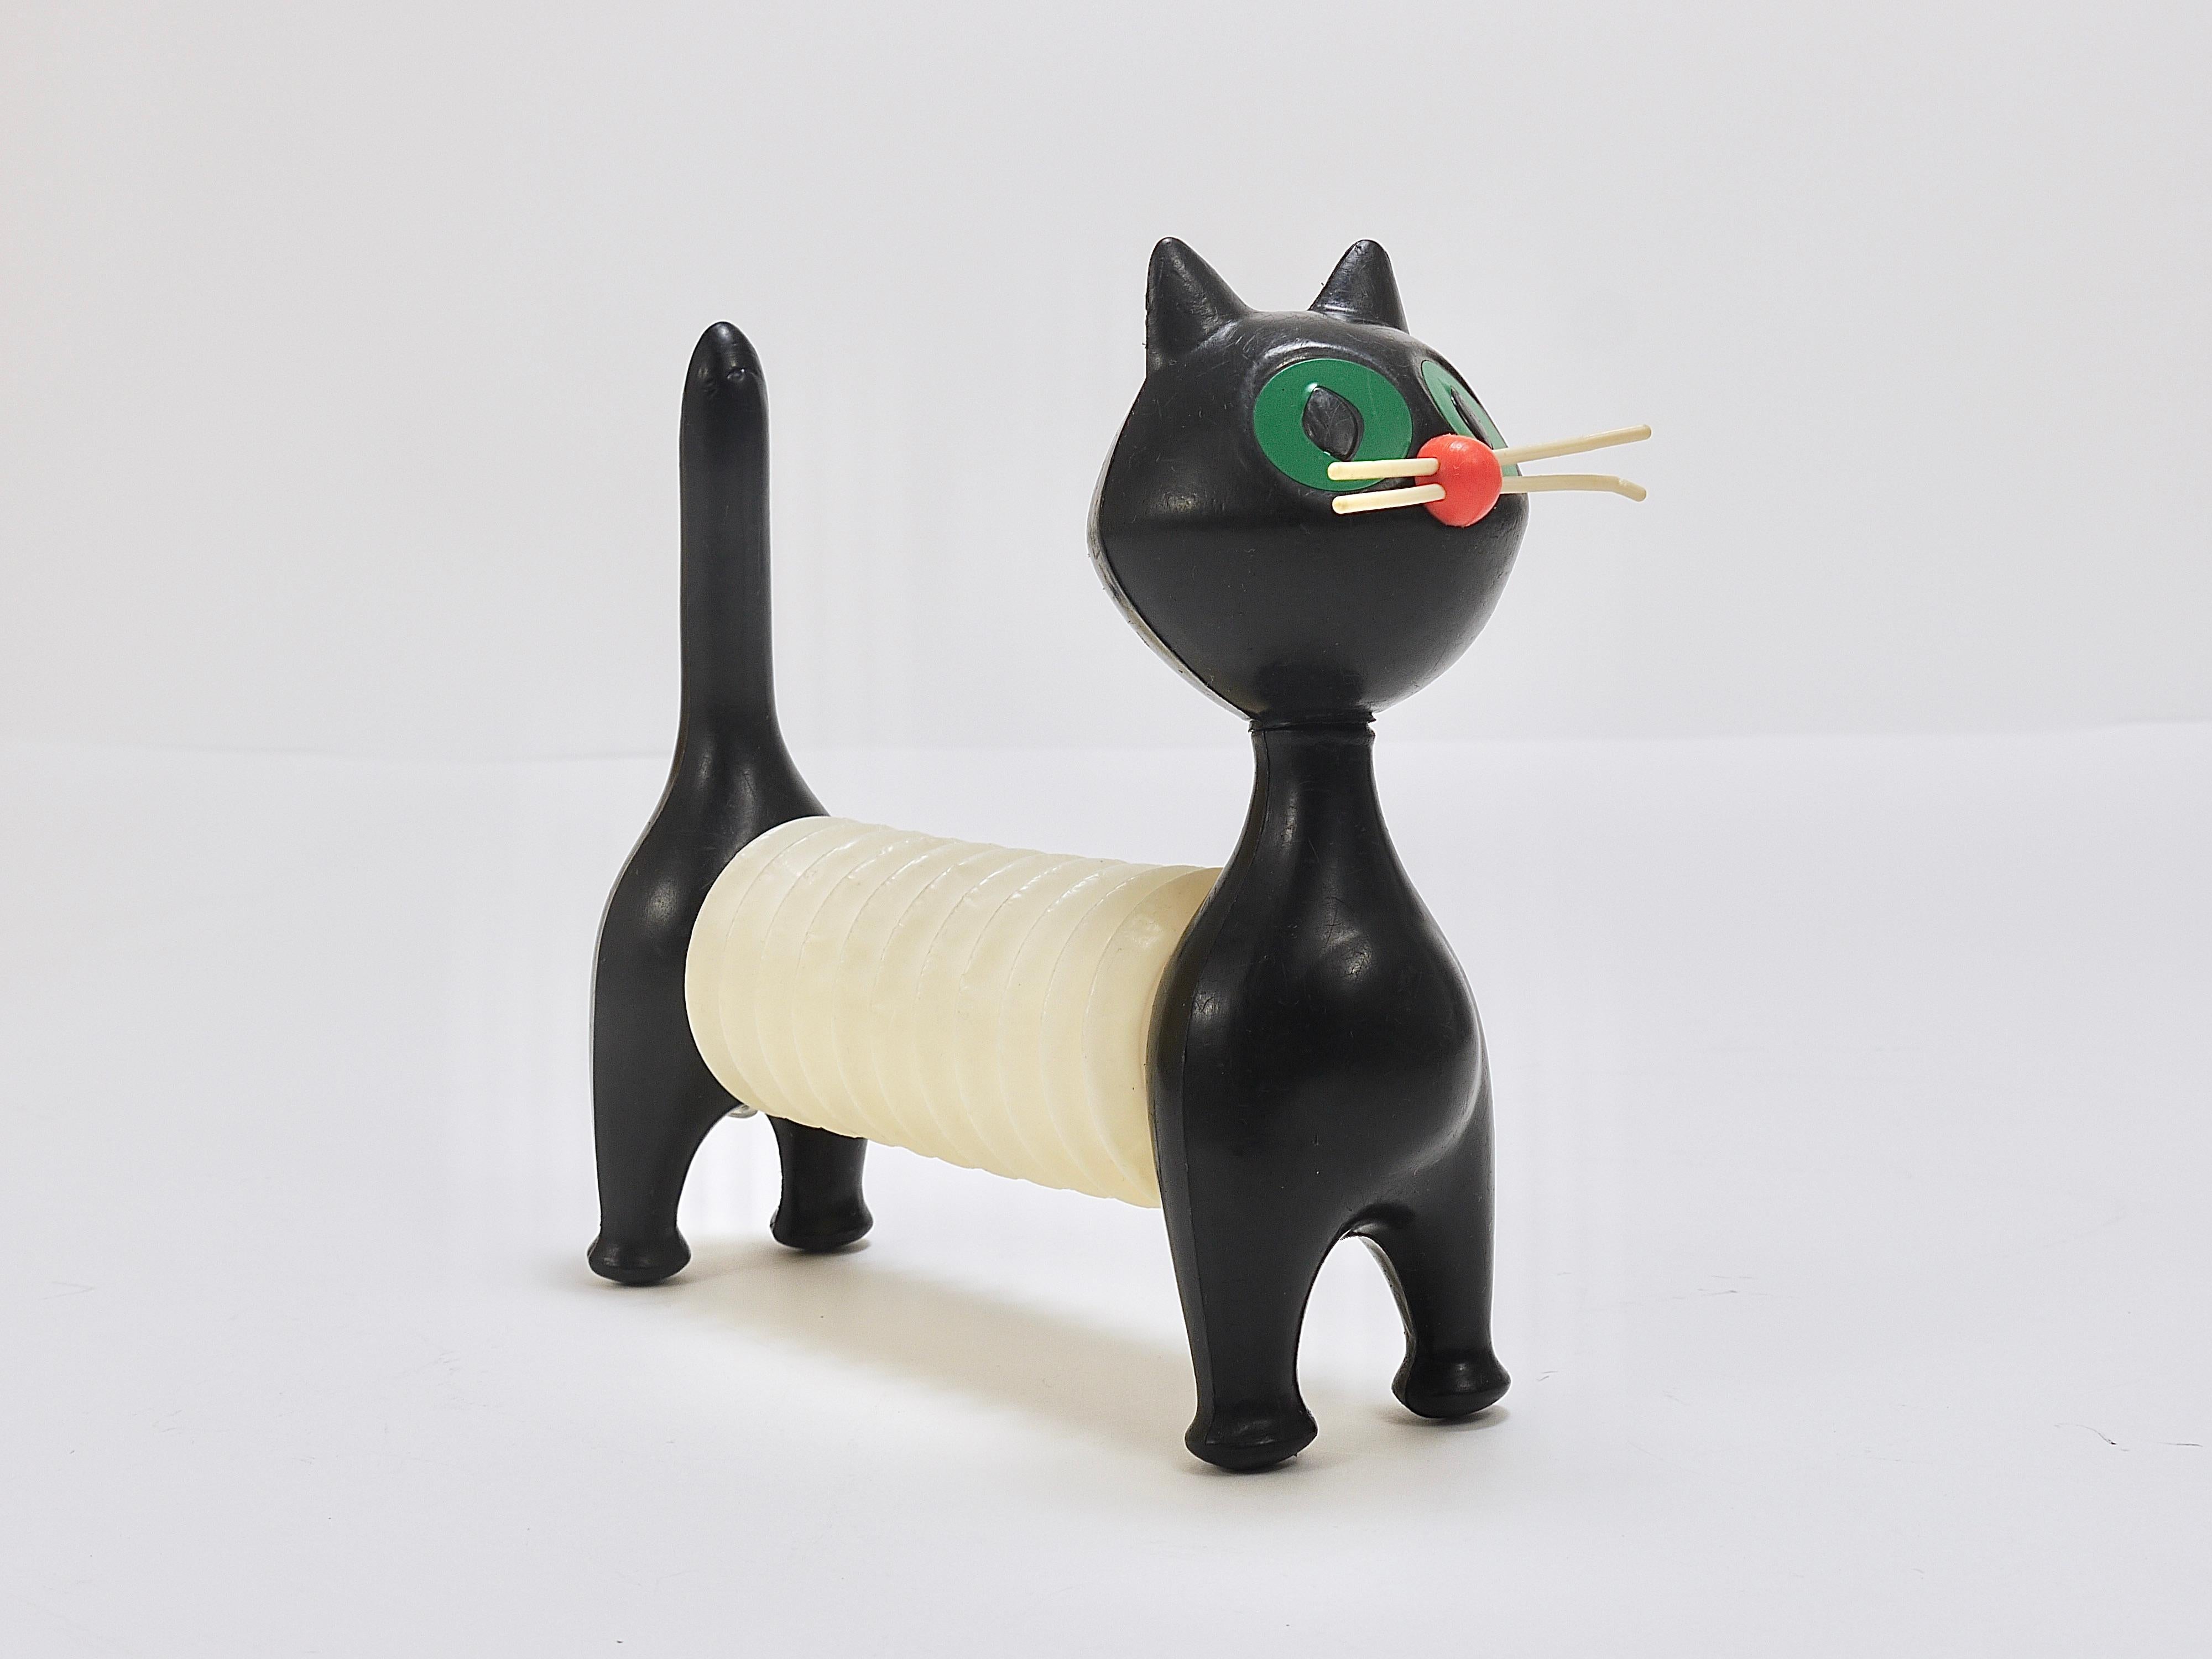 Plastic Libuse Niklova Accordion Squeaky Toy Cat „Tomcat“ by Fatra, Czechoslovakia 1960s For Sale